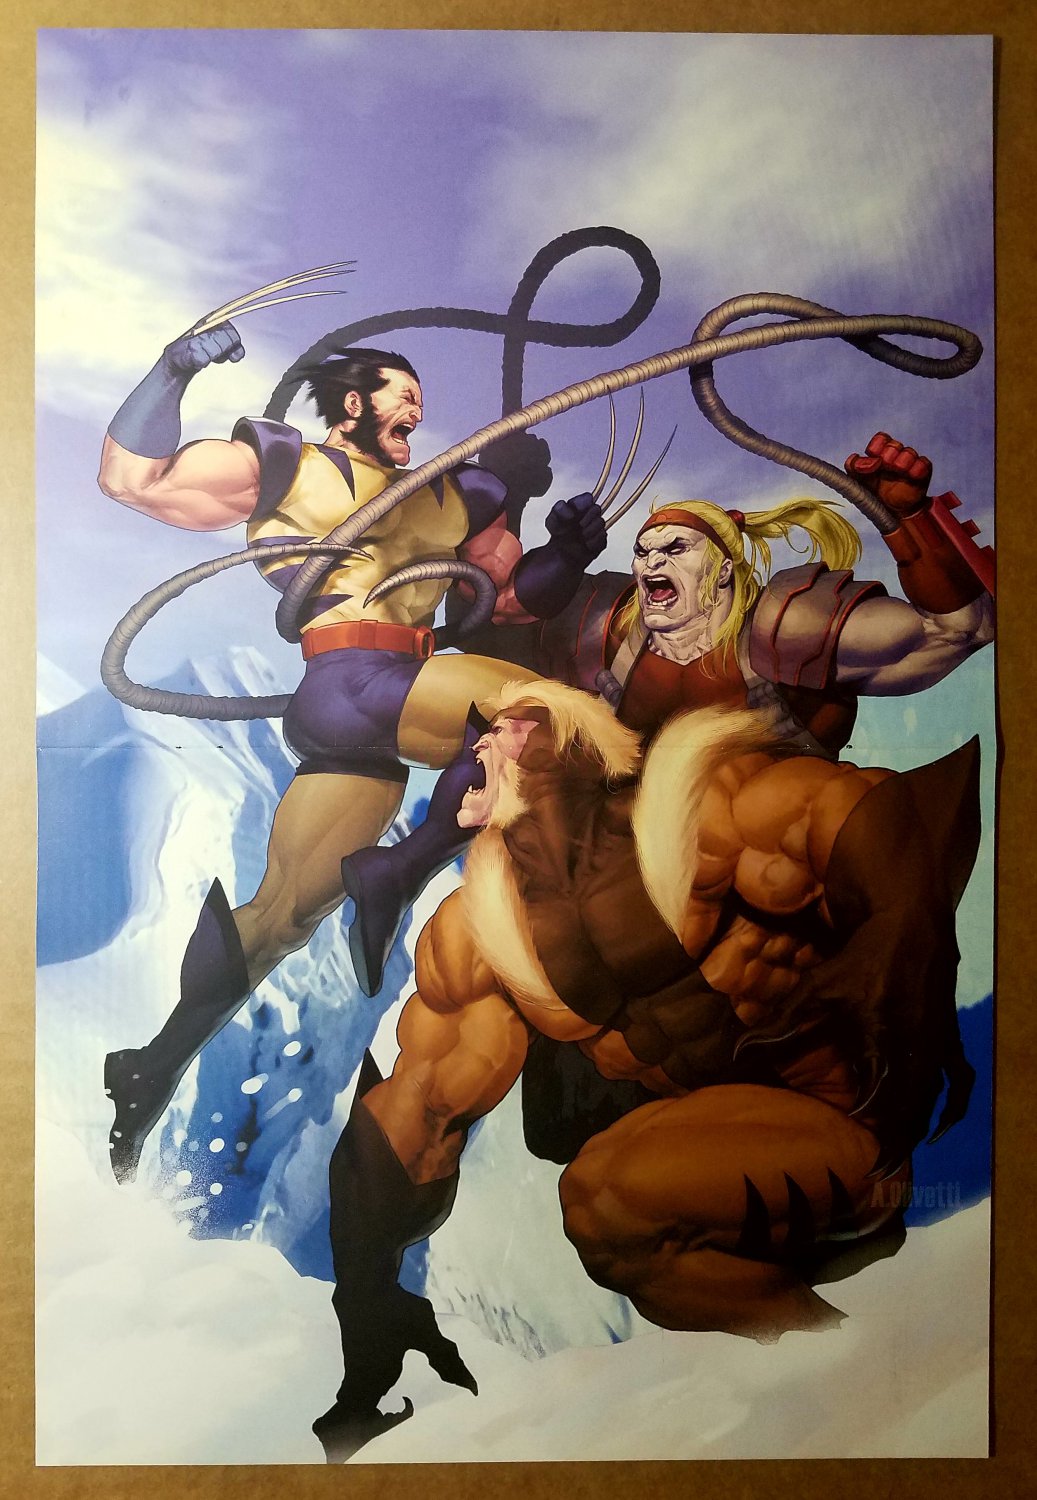 Wolverine Vs Omega Red Sabretooth Marvel Comic Poster by Ariel Olivetti.